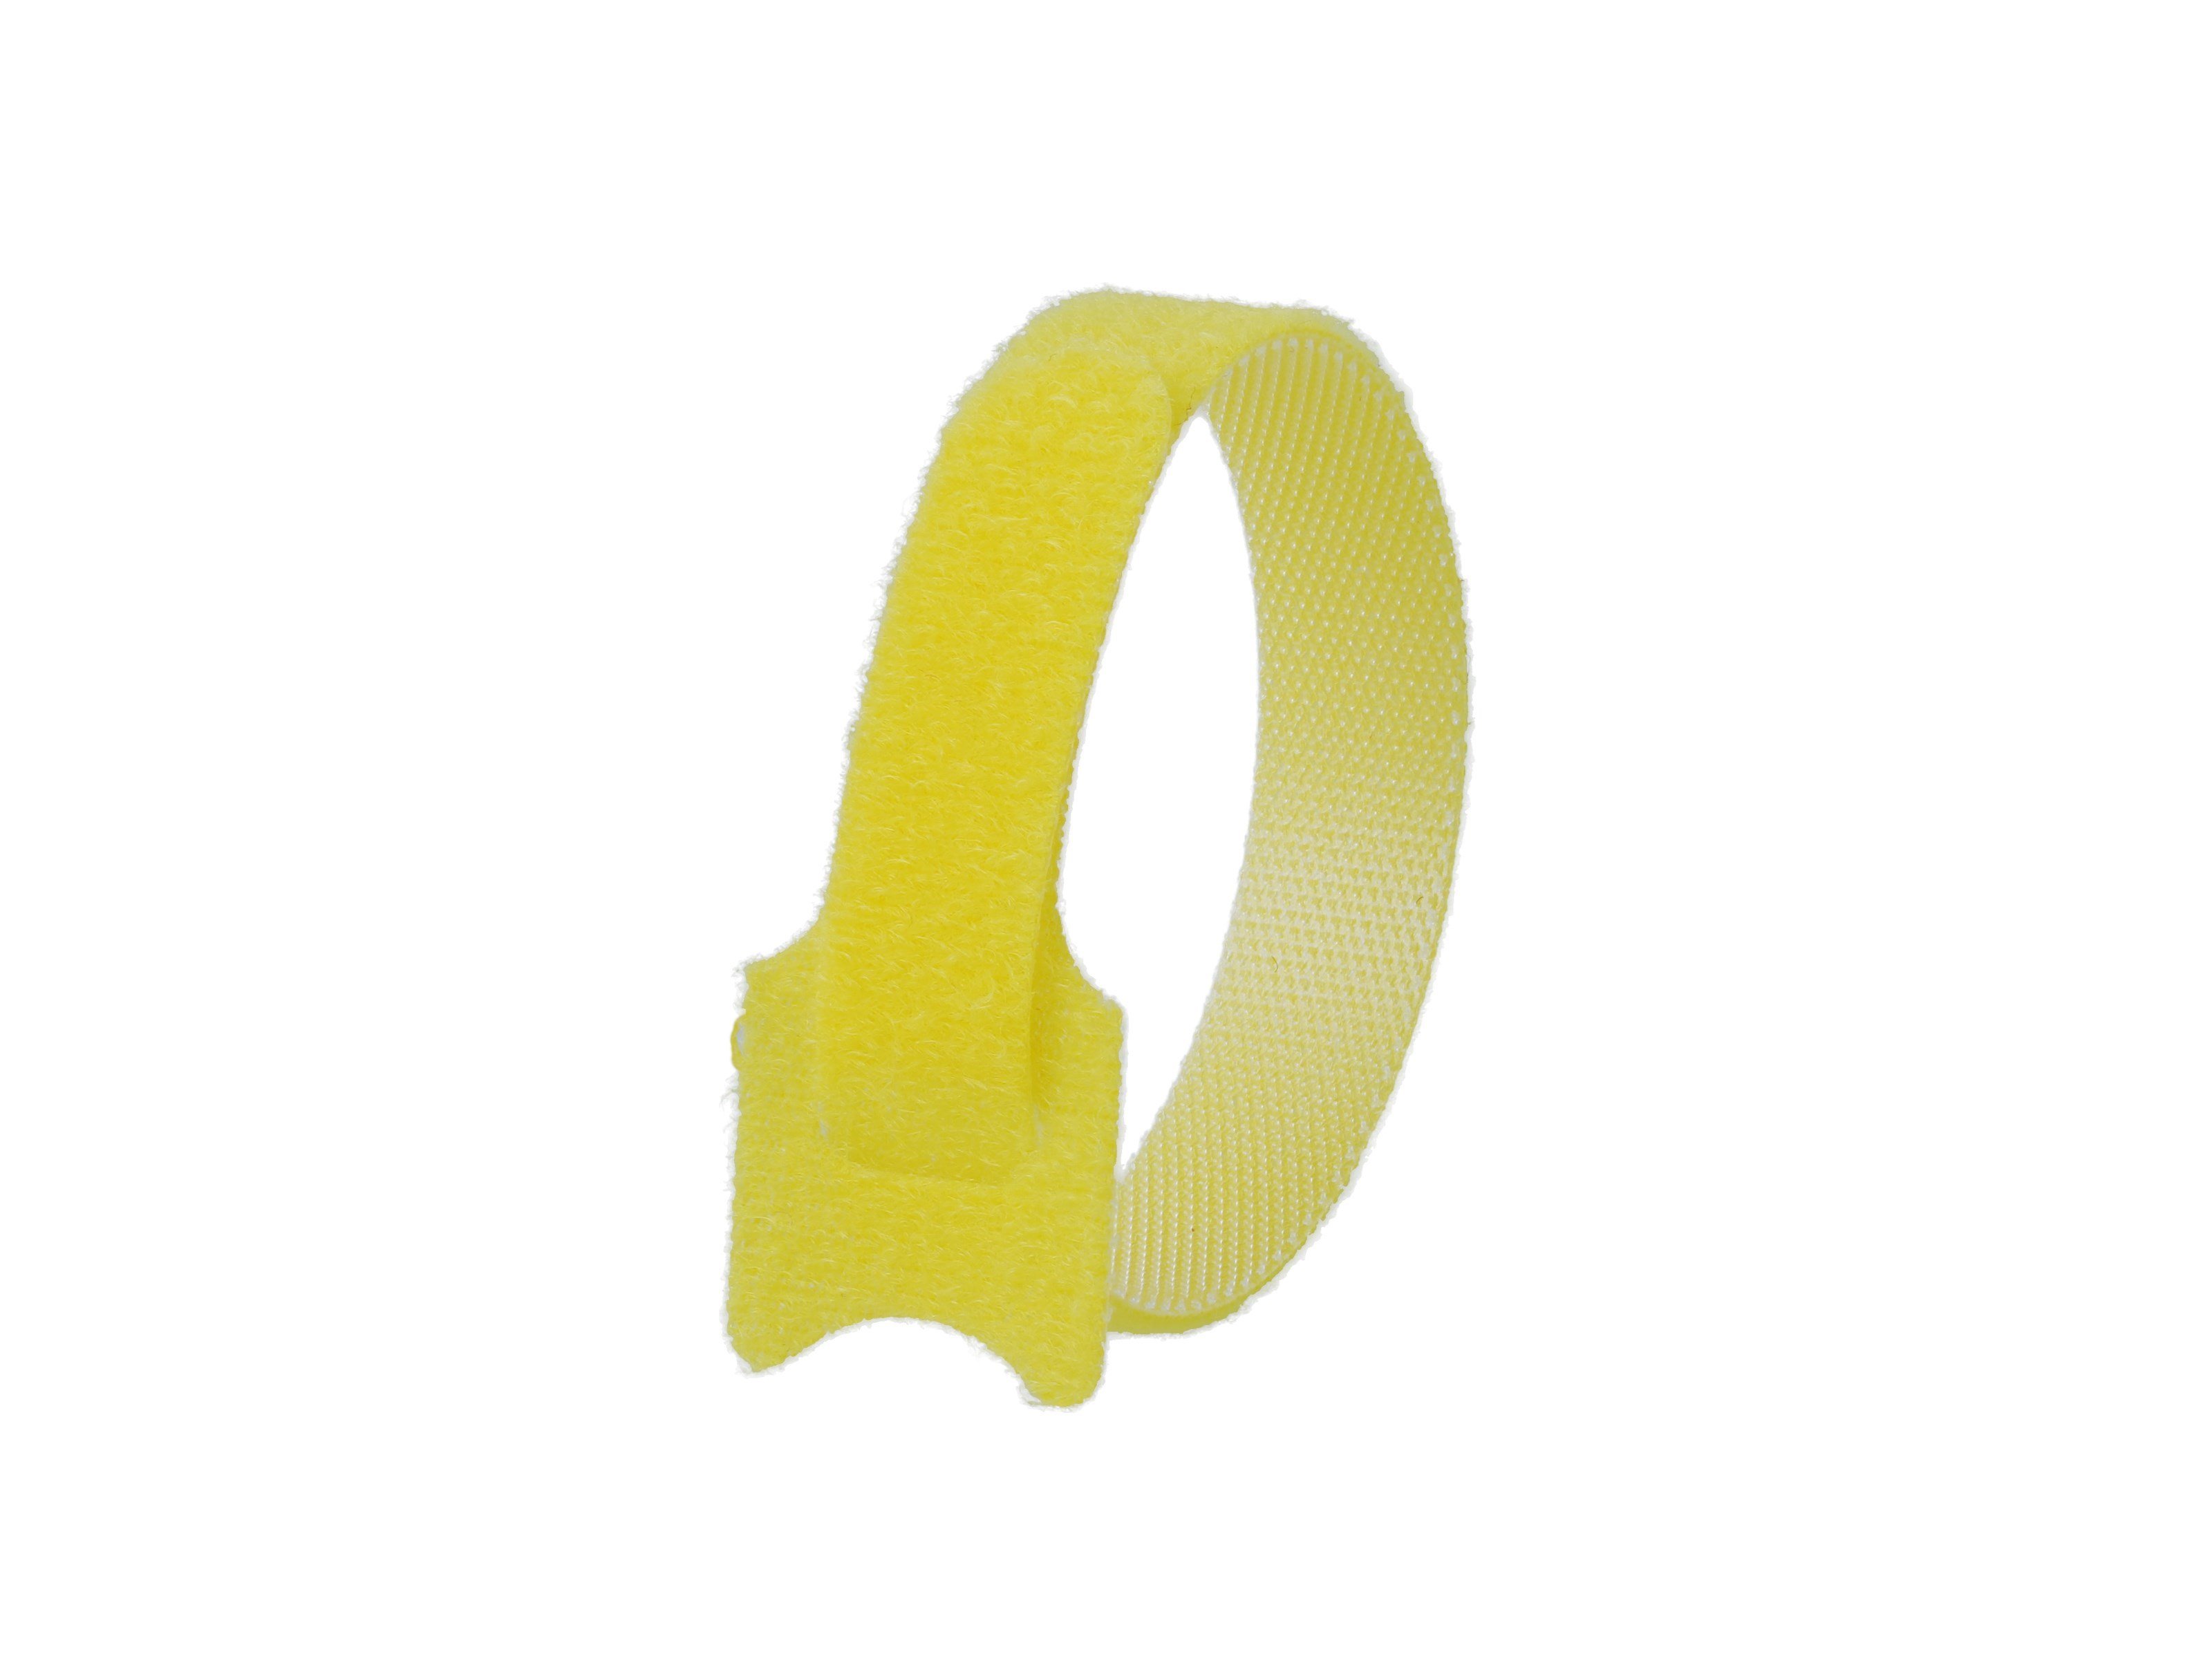 8 Inch Yellow Reuseable Tie Wrap - 50 Pack - Secure™ Cable Ties